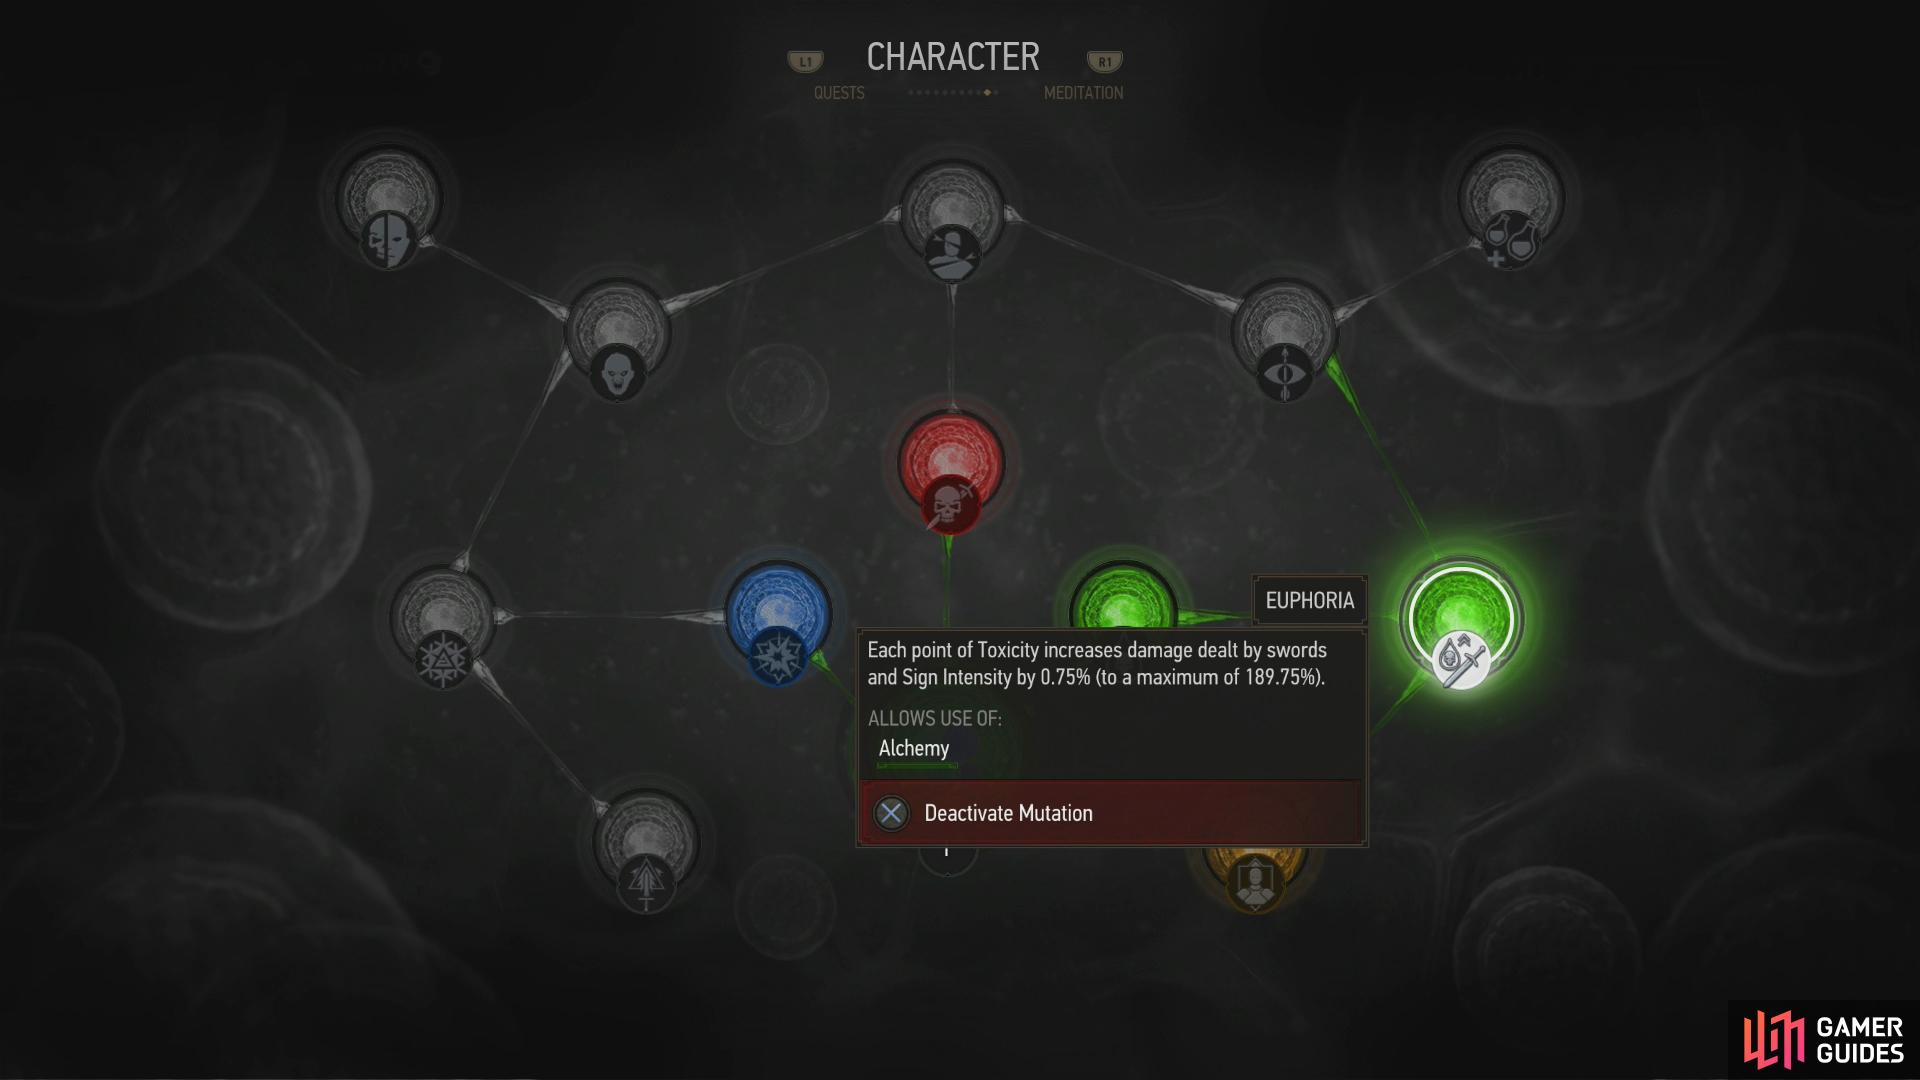 Youll unlock the Mutations Tree, where you can spend Ability Points and Greater Mutagens to unlock new abilities.